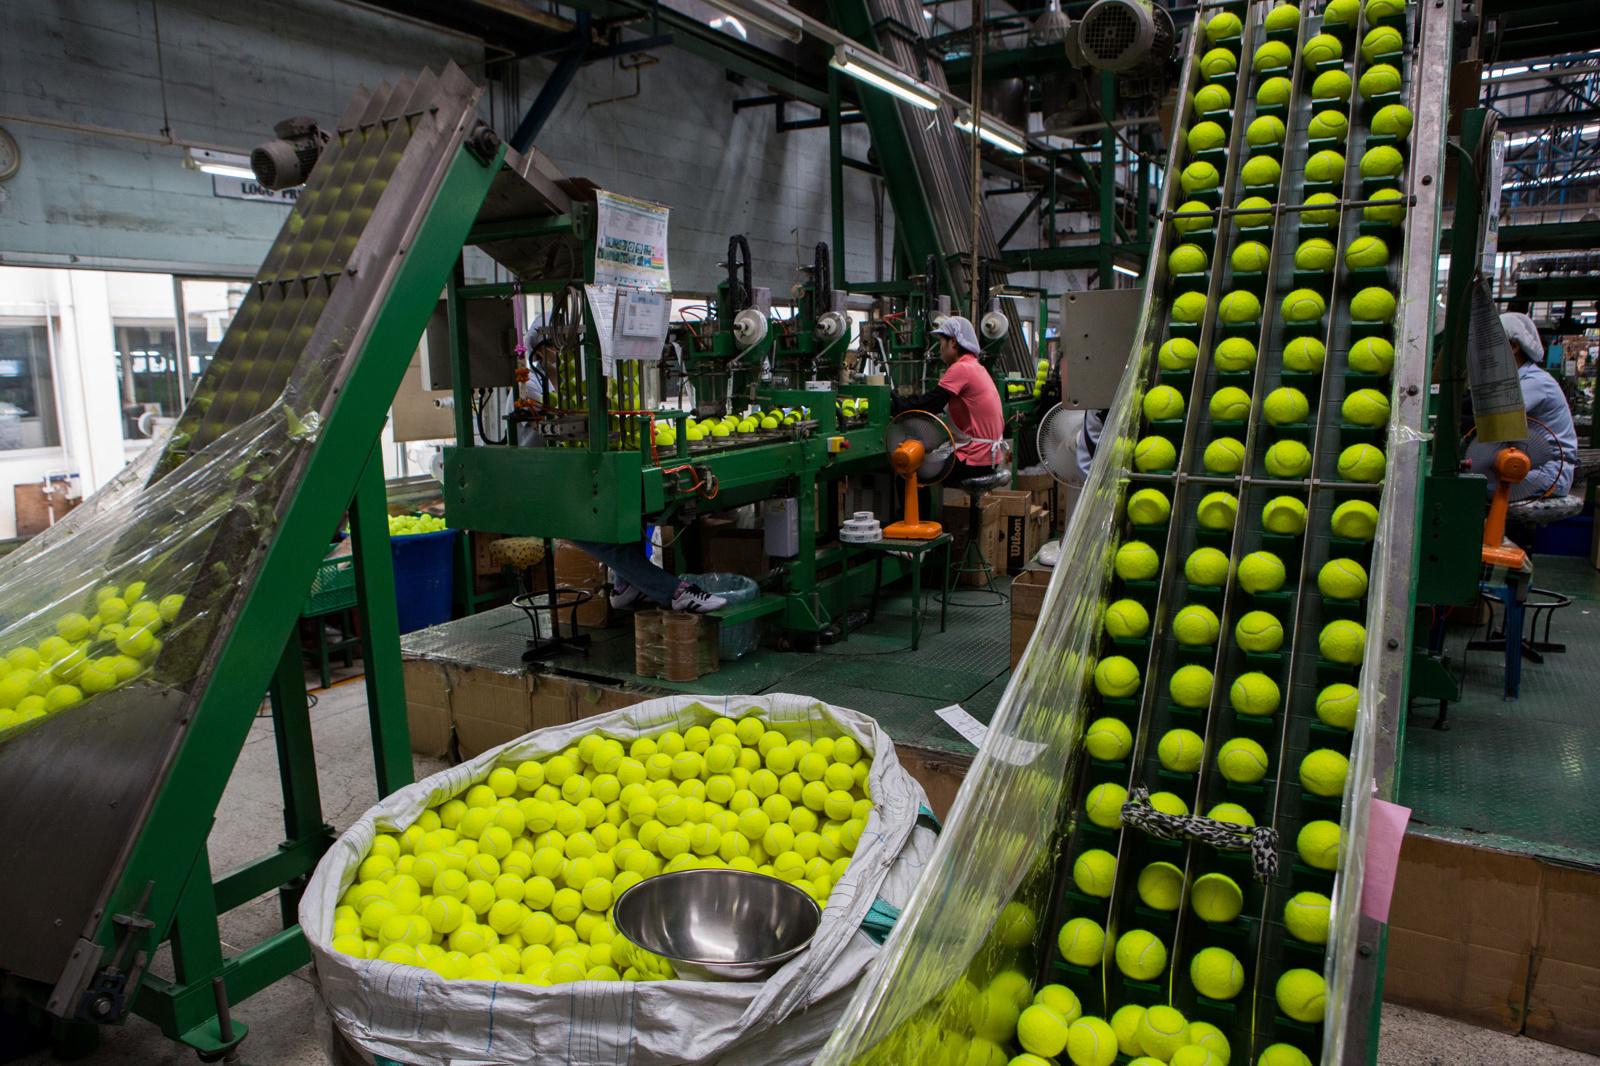 Wilson Tennis Ball Factory - For The New York Times - Nakhon Pathom, Thailand Ð August 18, 2016 : Finished...